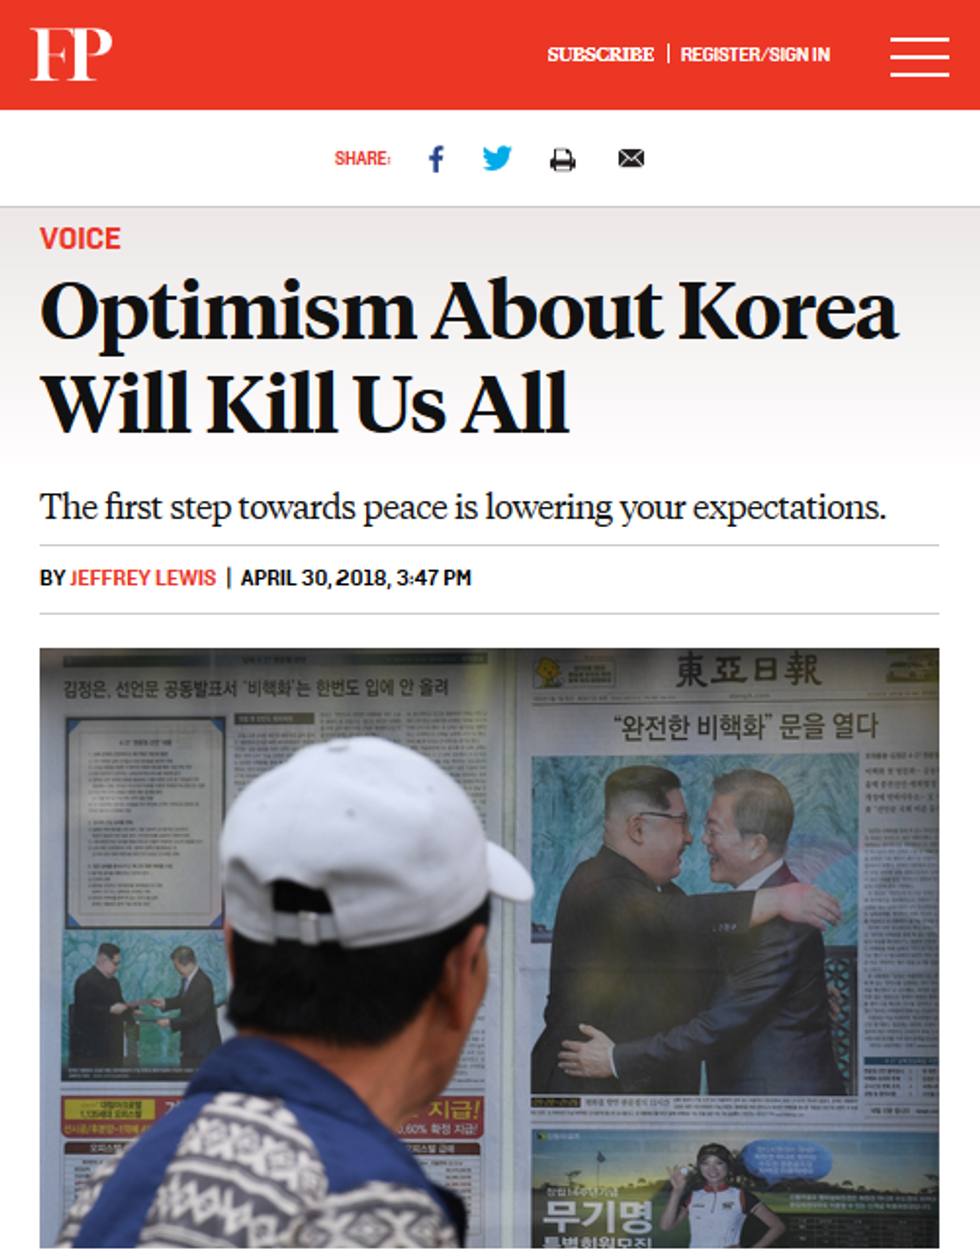 Foreign Policy: Optimism About Korea Will Kill Us All